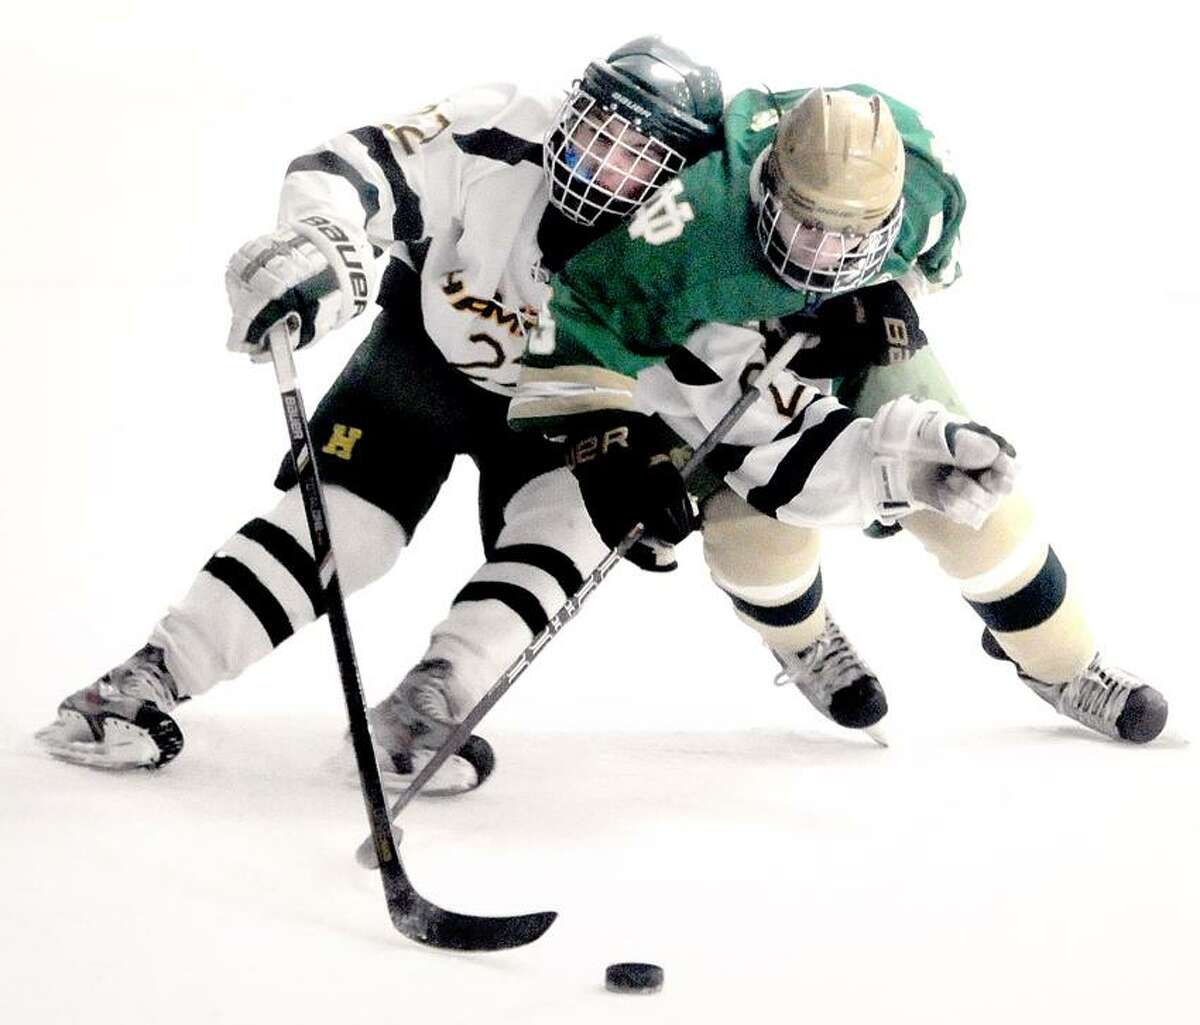 Michael DeMatteis (left) of Hamden and Cameron Hotchkiss (right) of Notre Dame of West Haven fight for the puck in the first period on 1/26/2013.Photo by Arnold Gold/New Haven Register